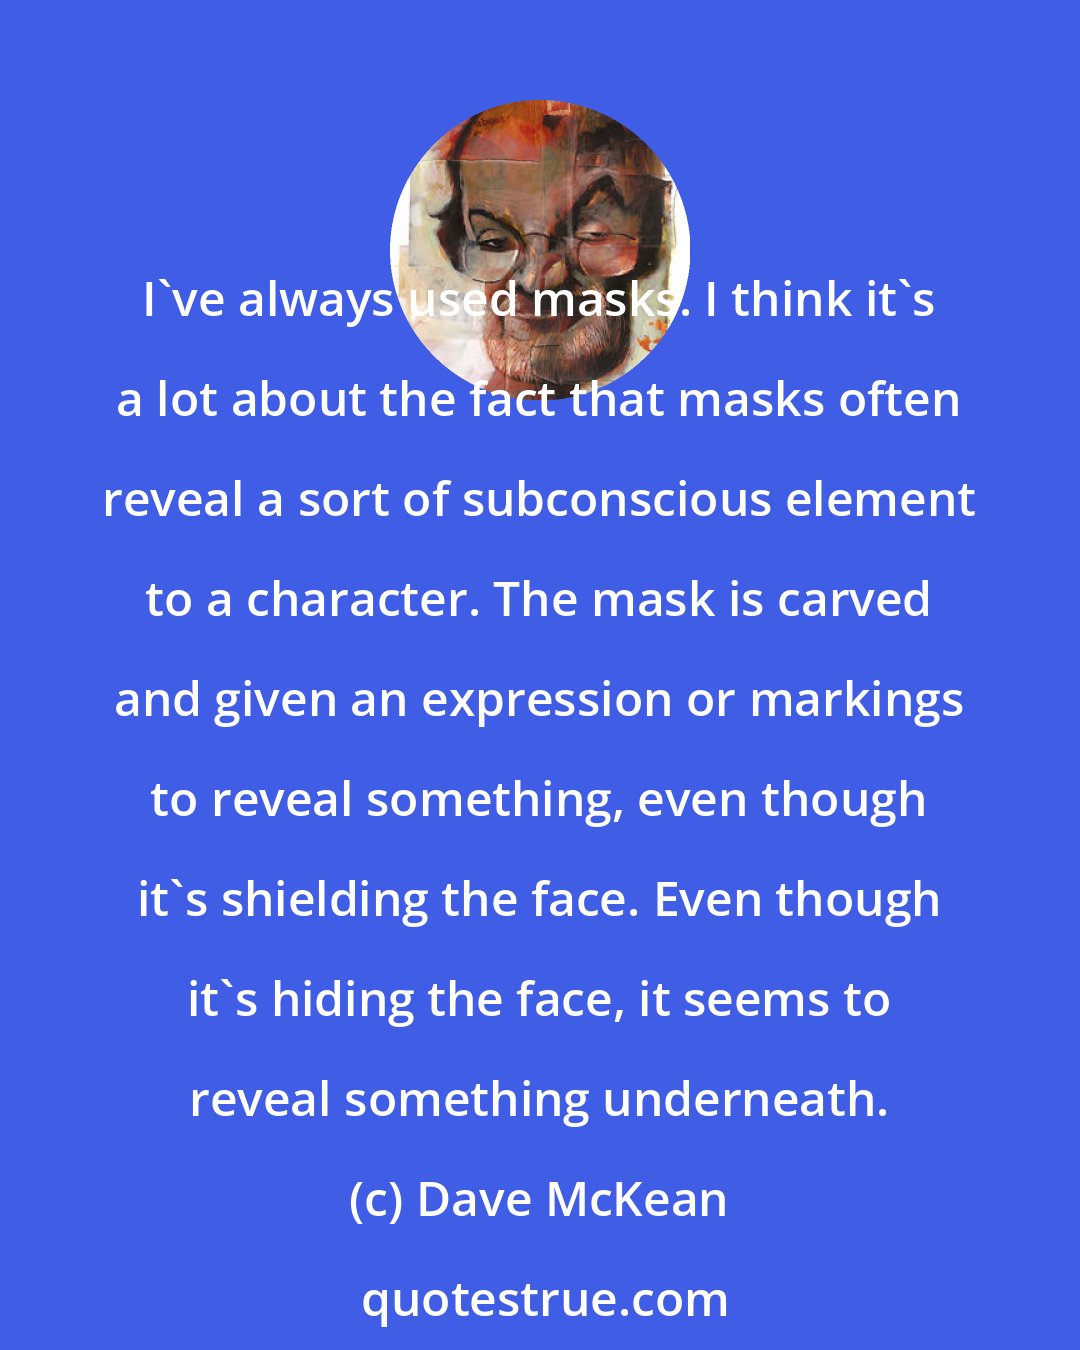 Dave McKean: I've always used masks. I think it's a lot about the fact that masks often reveal a sort of subconscious element to a character. The mask is carved and given an expression or markings to reveal something, even though it's shielding the face. Even though it's hiding the face, it seems to reveal something underneath.